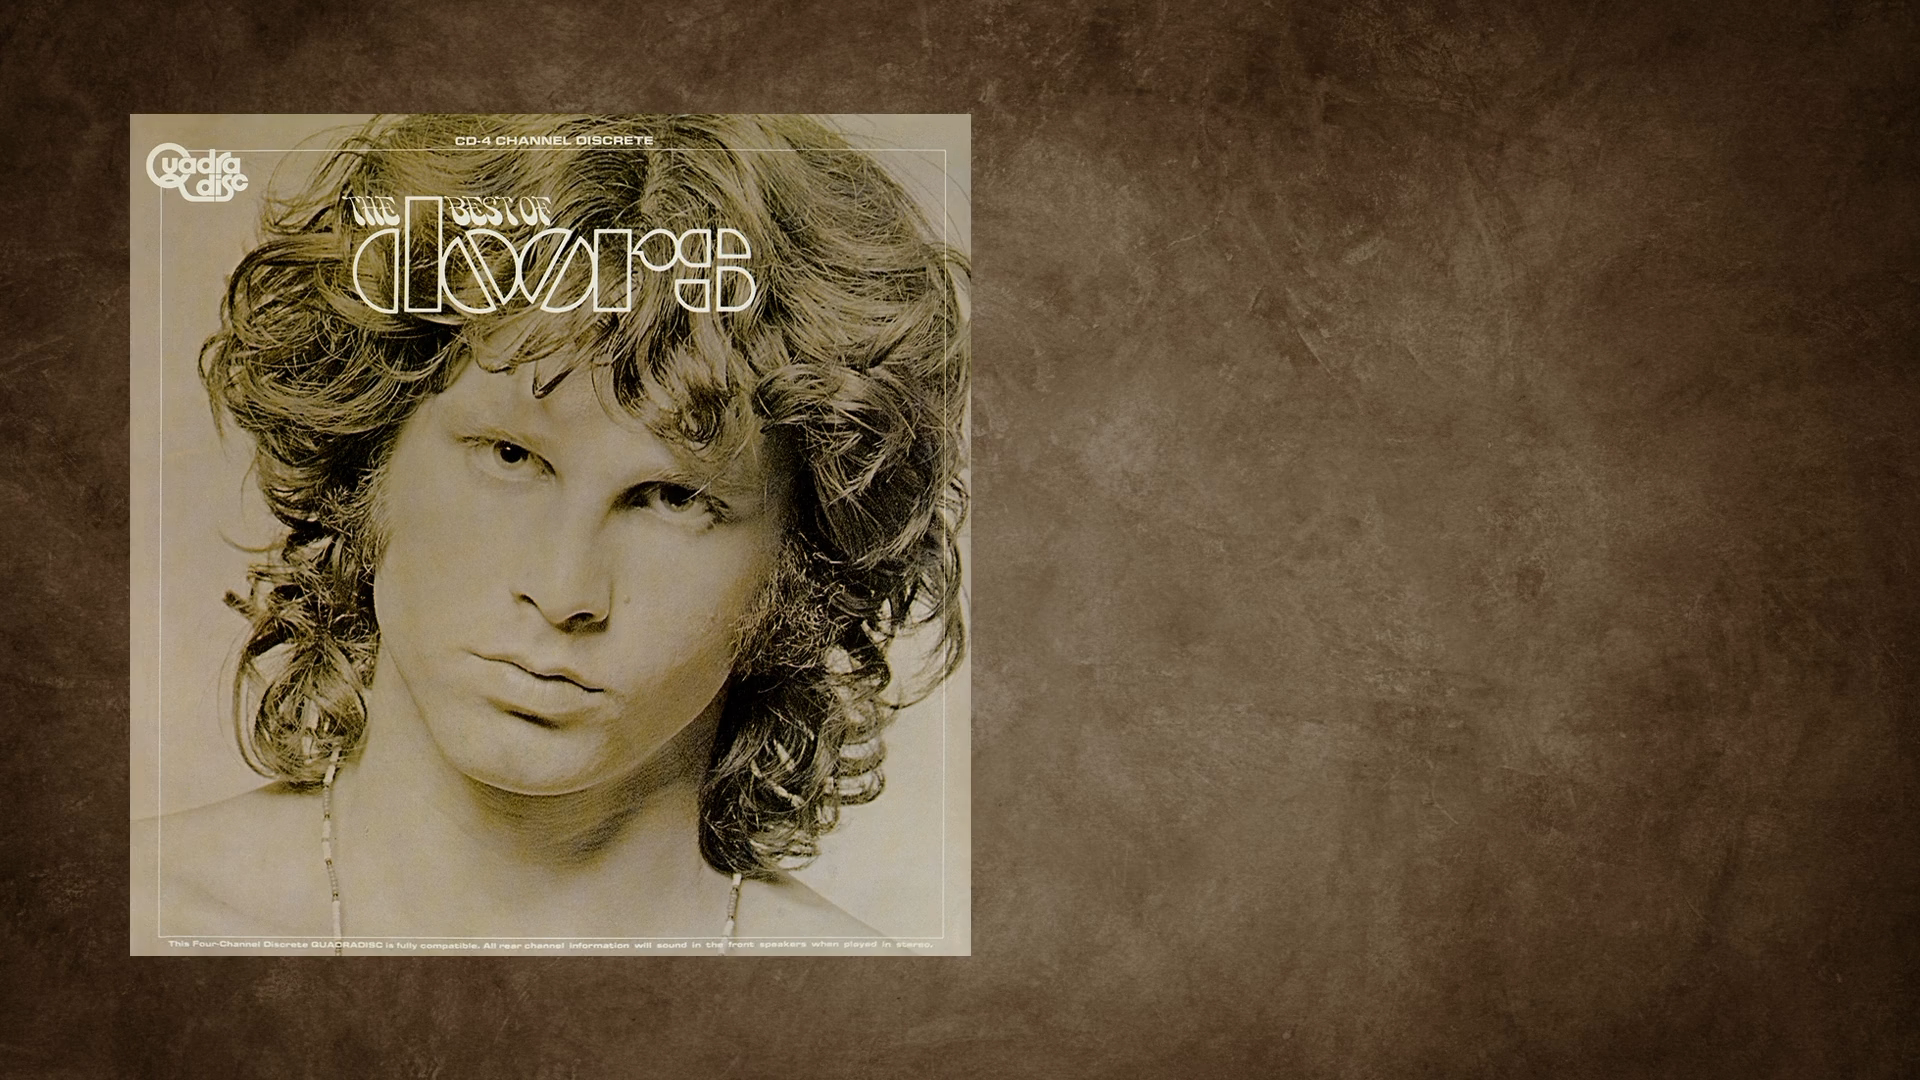 00000.m2ts(The Best Of The Doors Quadio)_20170923_105336.140.png